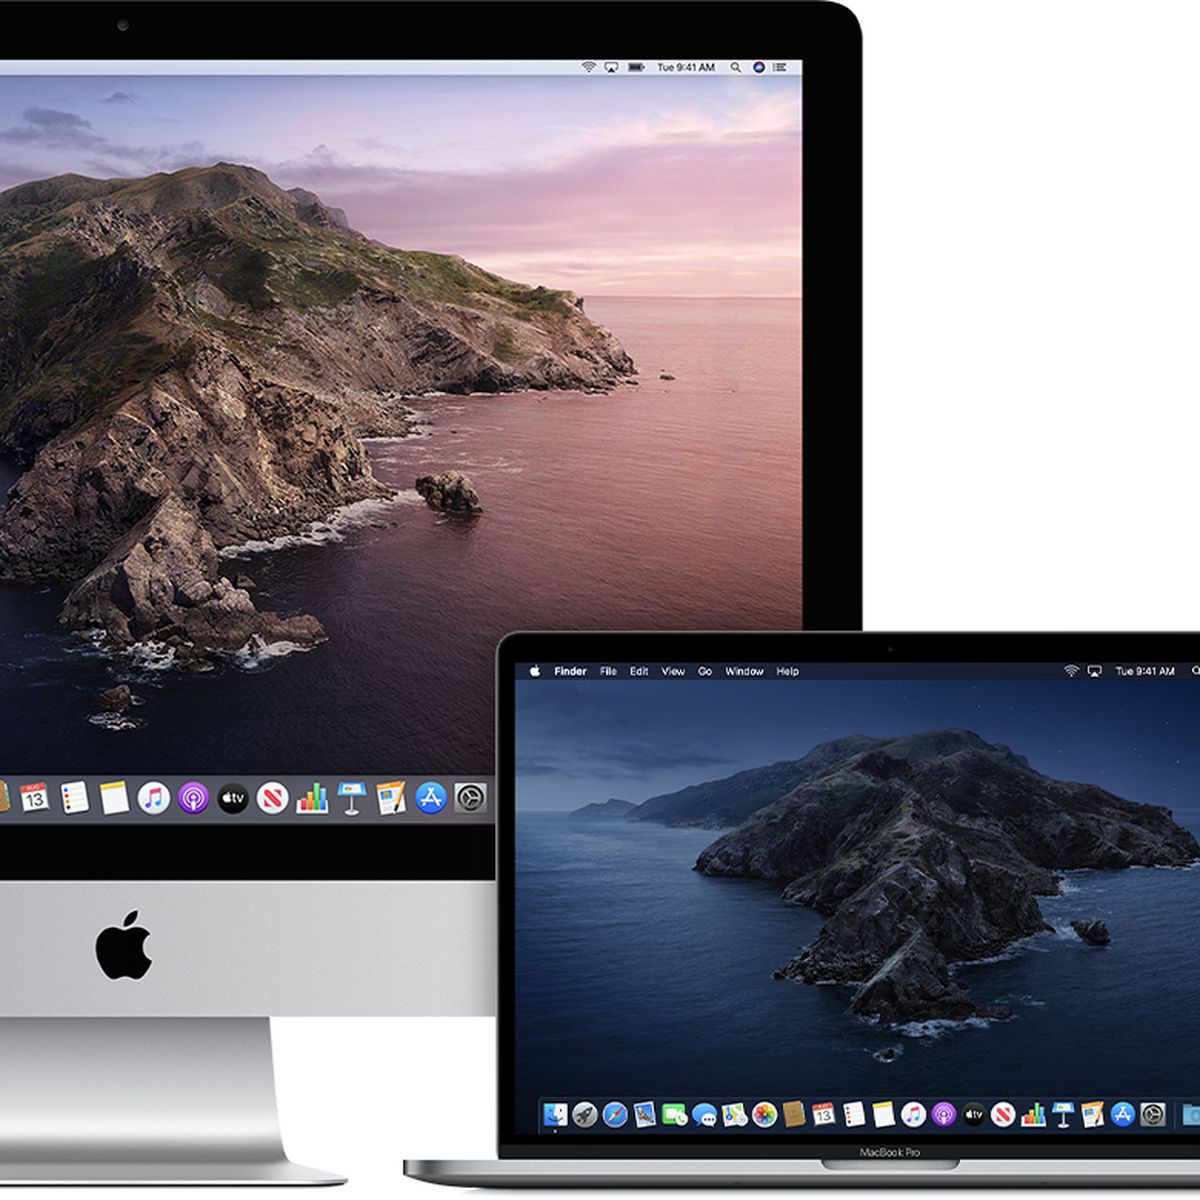 download yosemite to usb using pc for install on mac